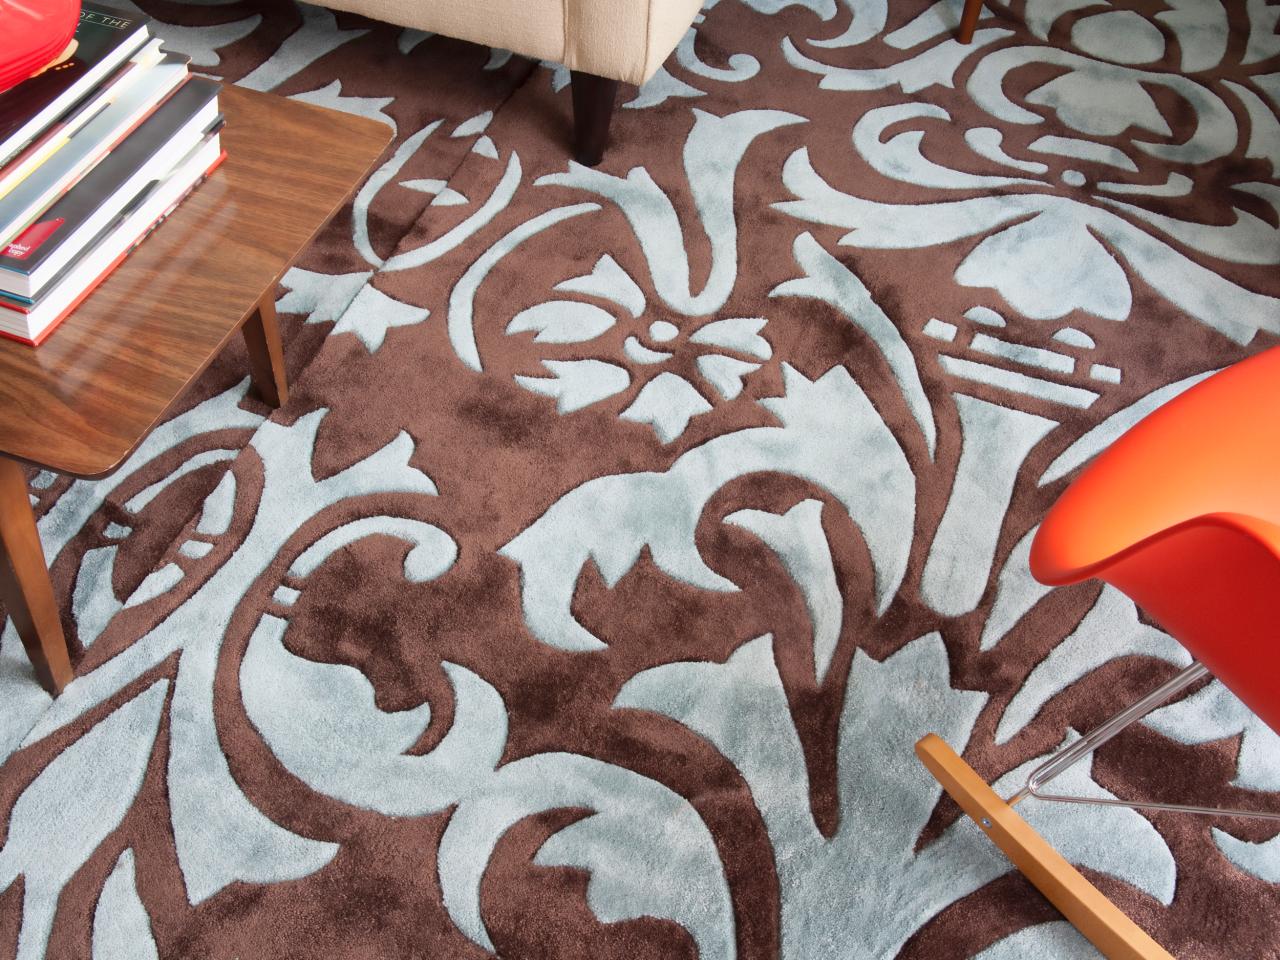 How To Make One Large Custom Area Rug, Make Rug Out Of Carpet